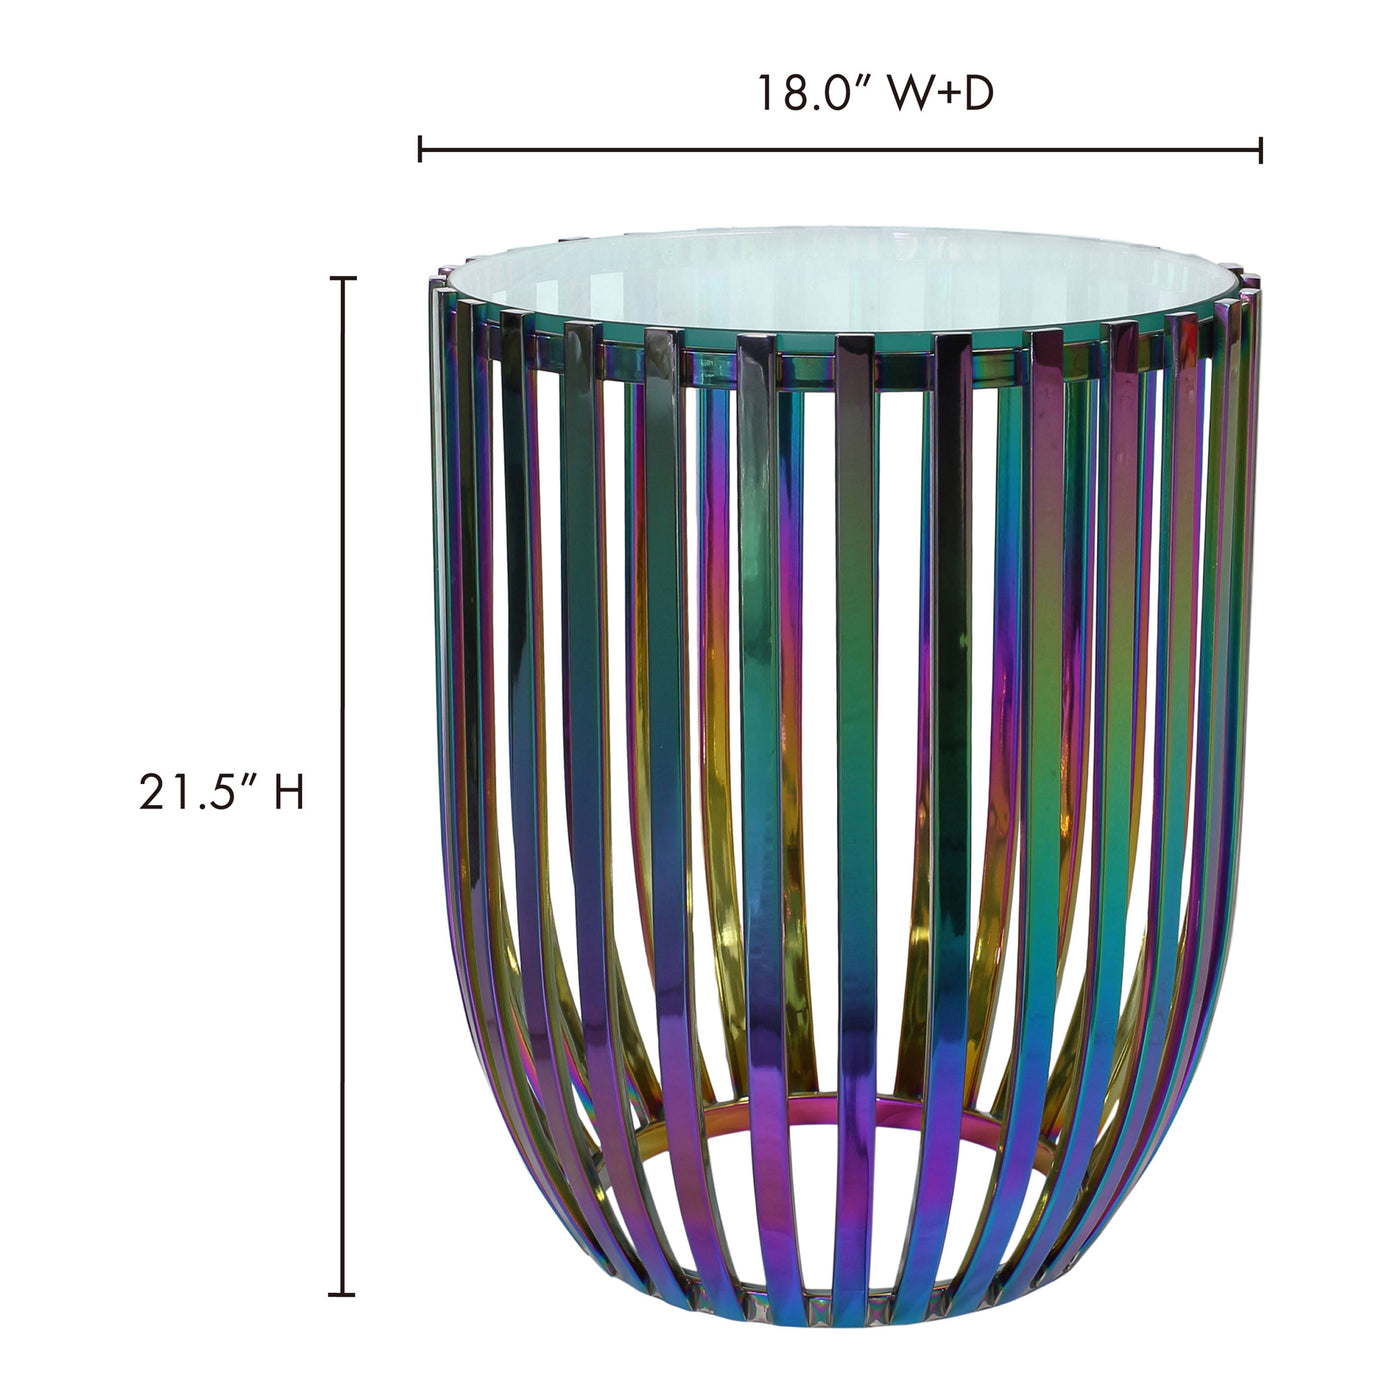 The Prism Side Table gives a glam feel to your space. The glass tabletop provides an airy feeling, letting you admire the ...